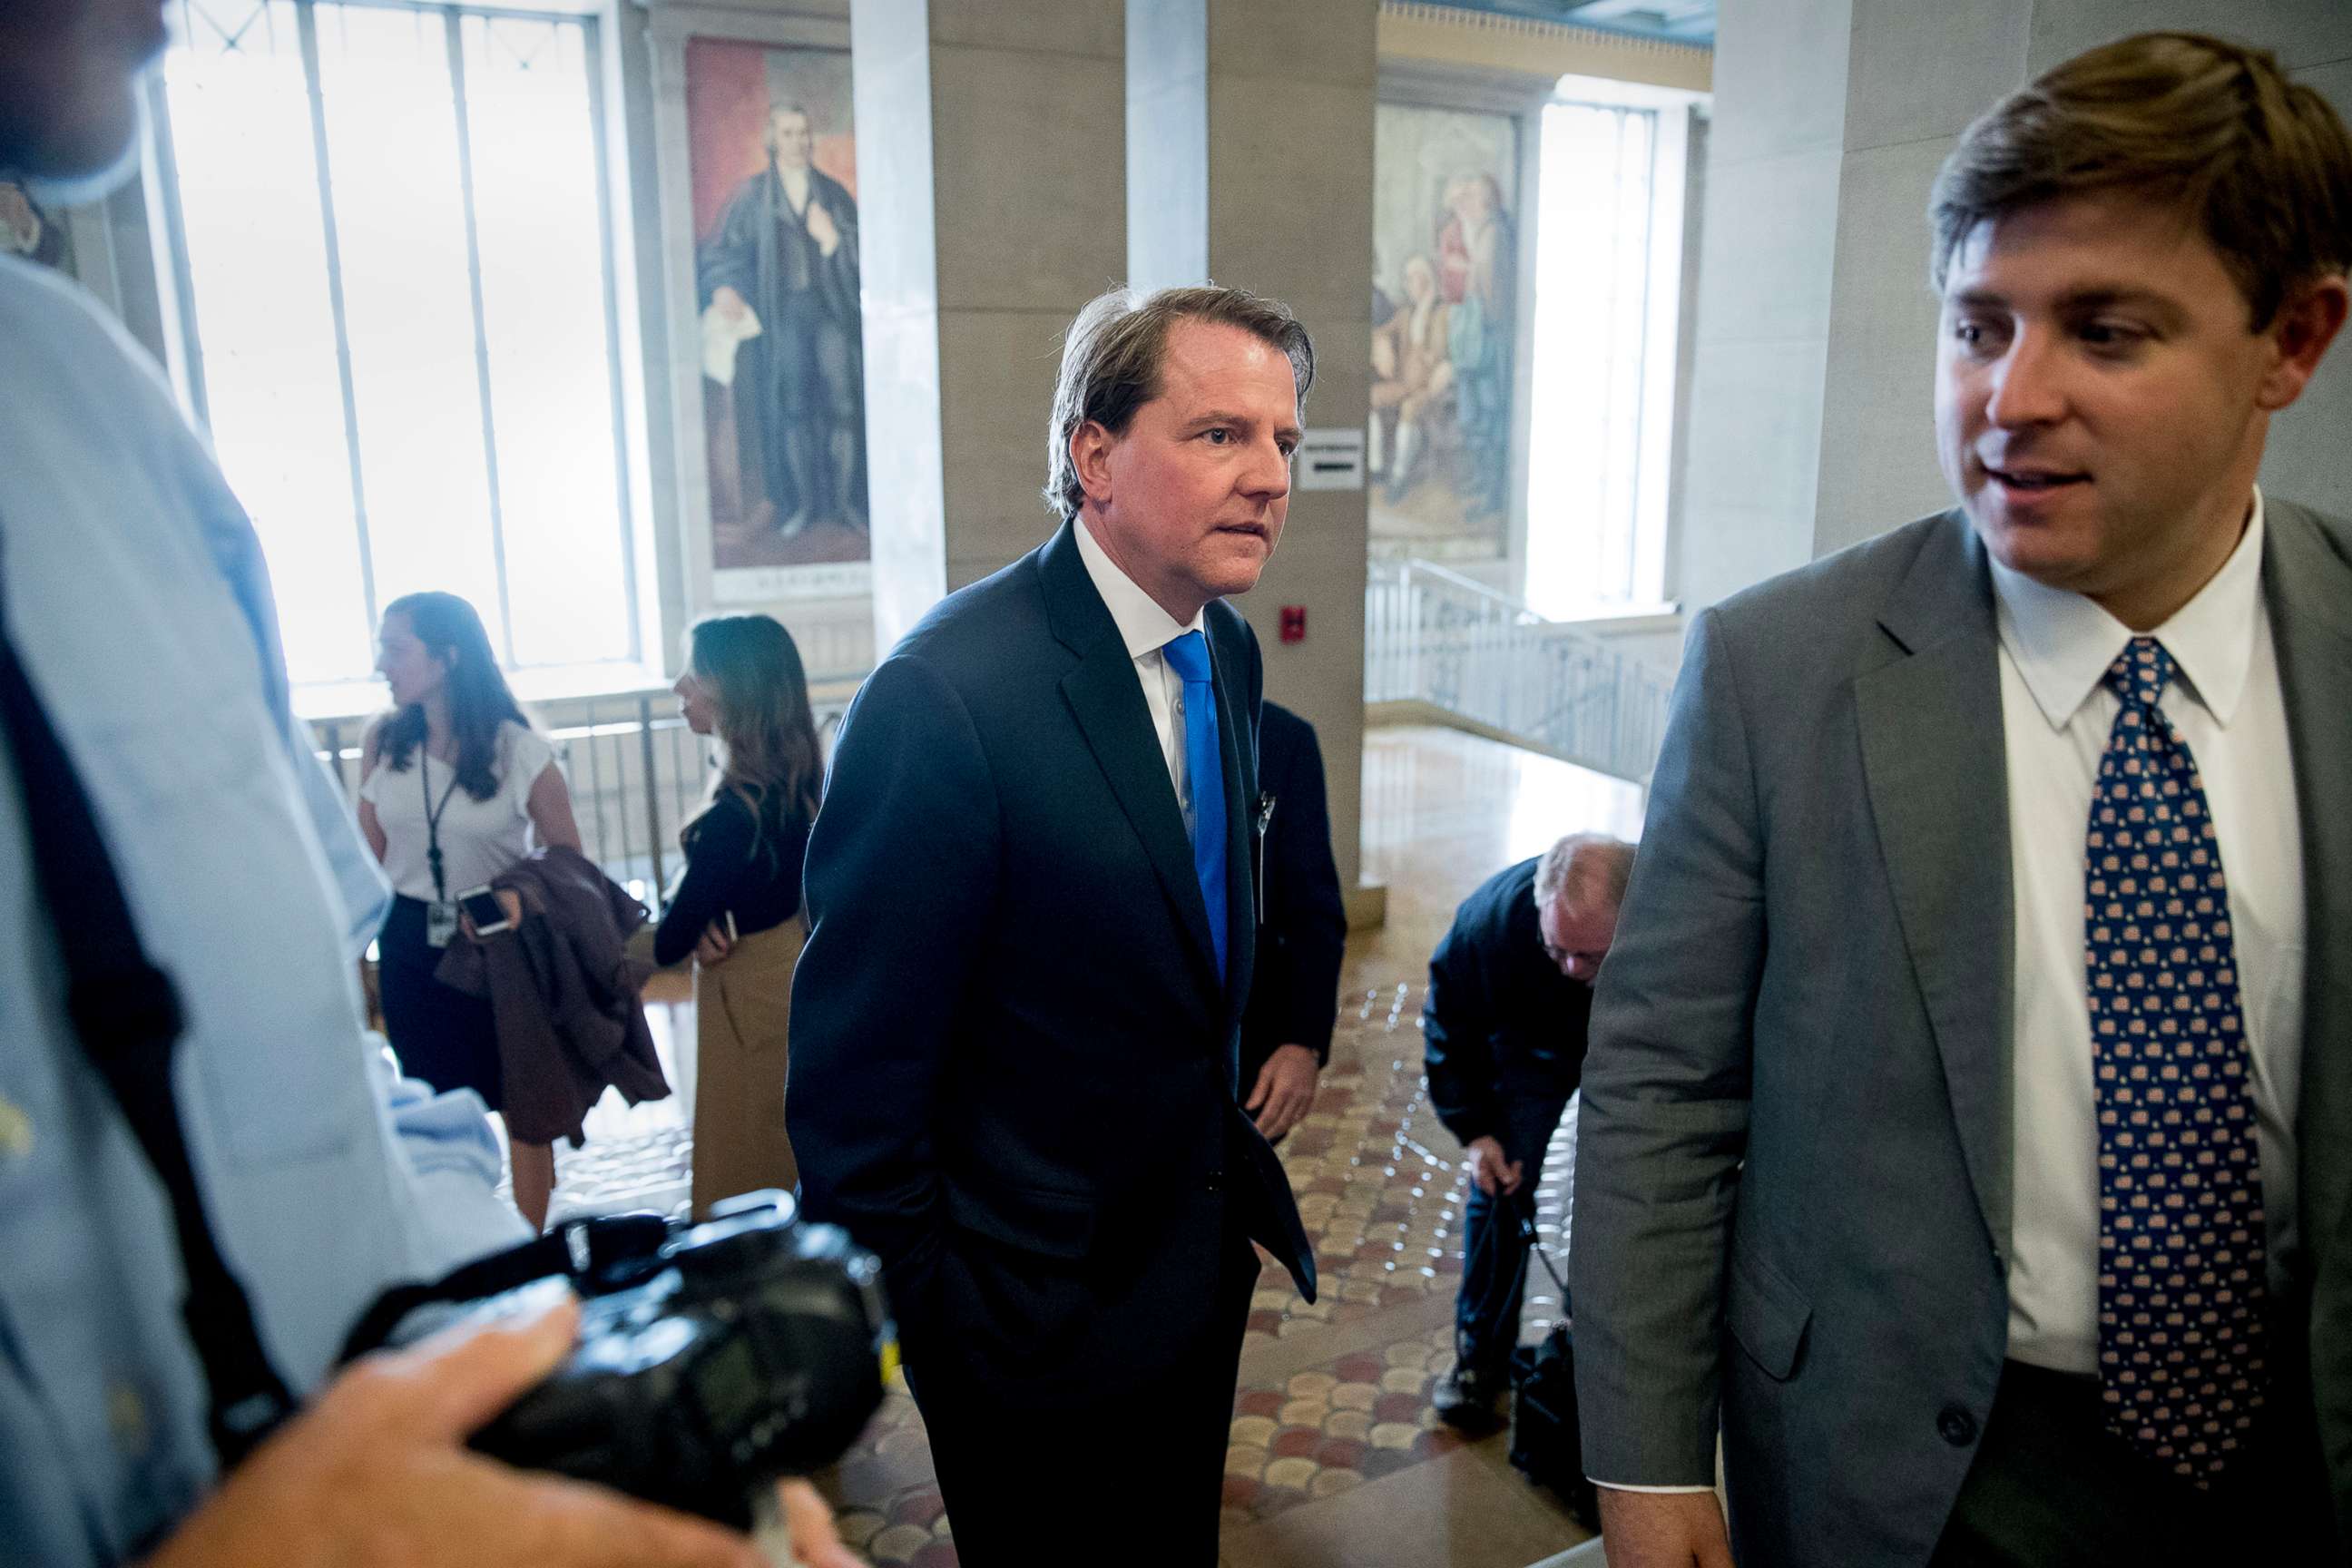 PHOTO: Former White House Counsel Don McGahn arrives an event at the Department of Justice in Washington, May 9, 2019.